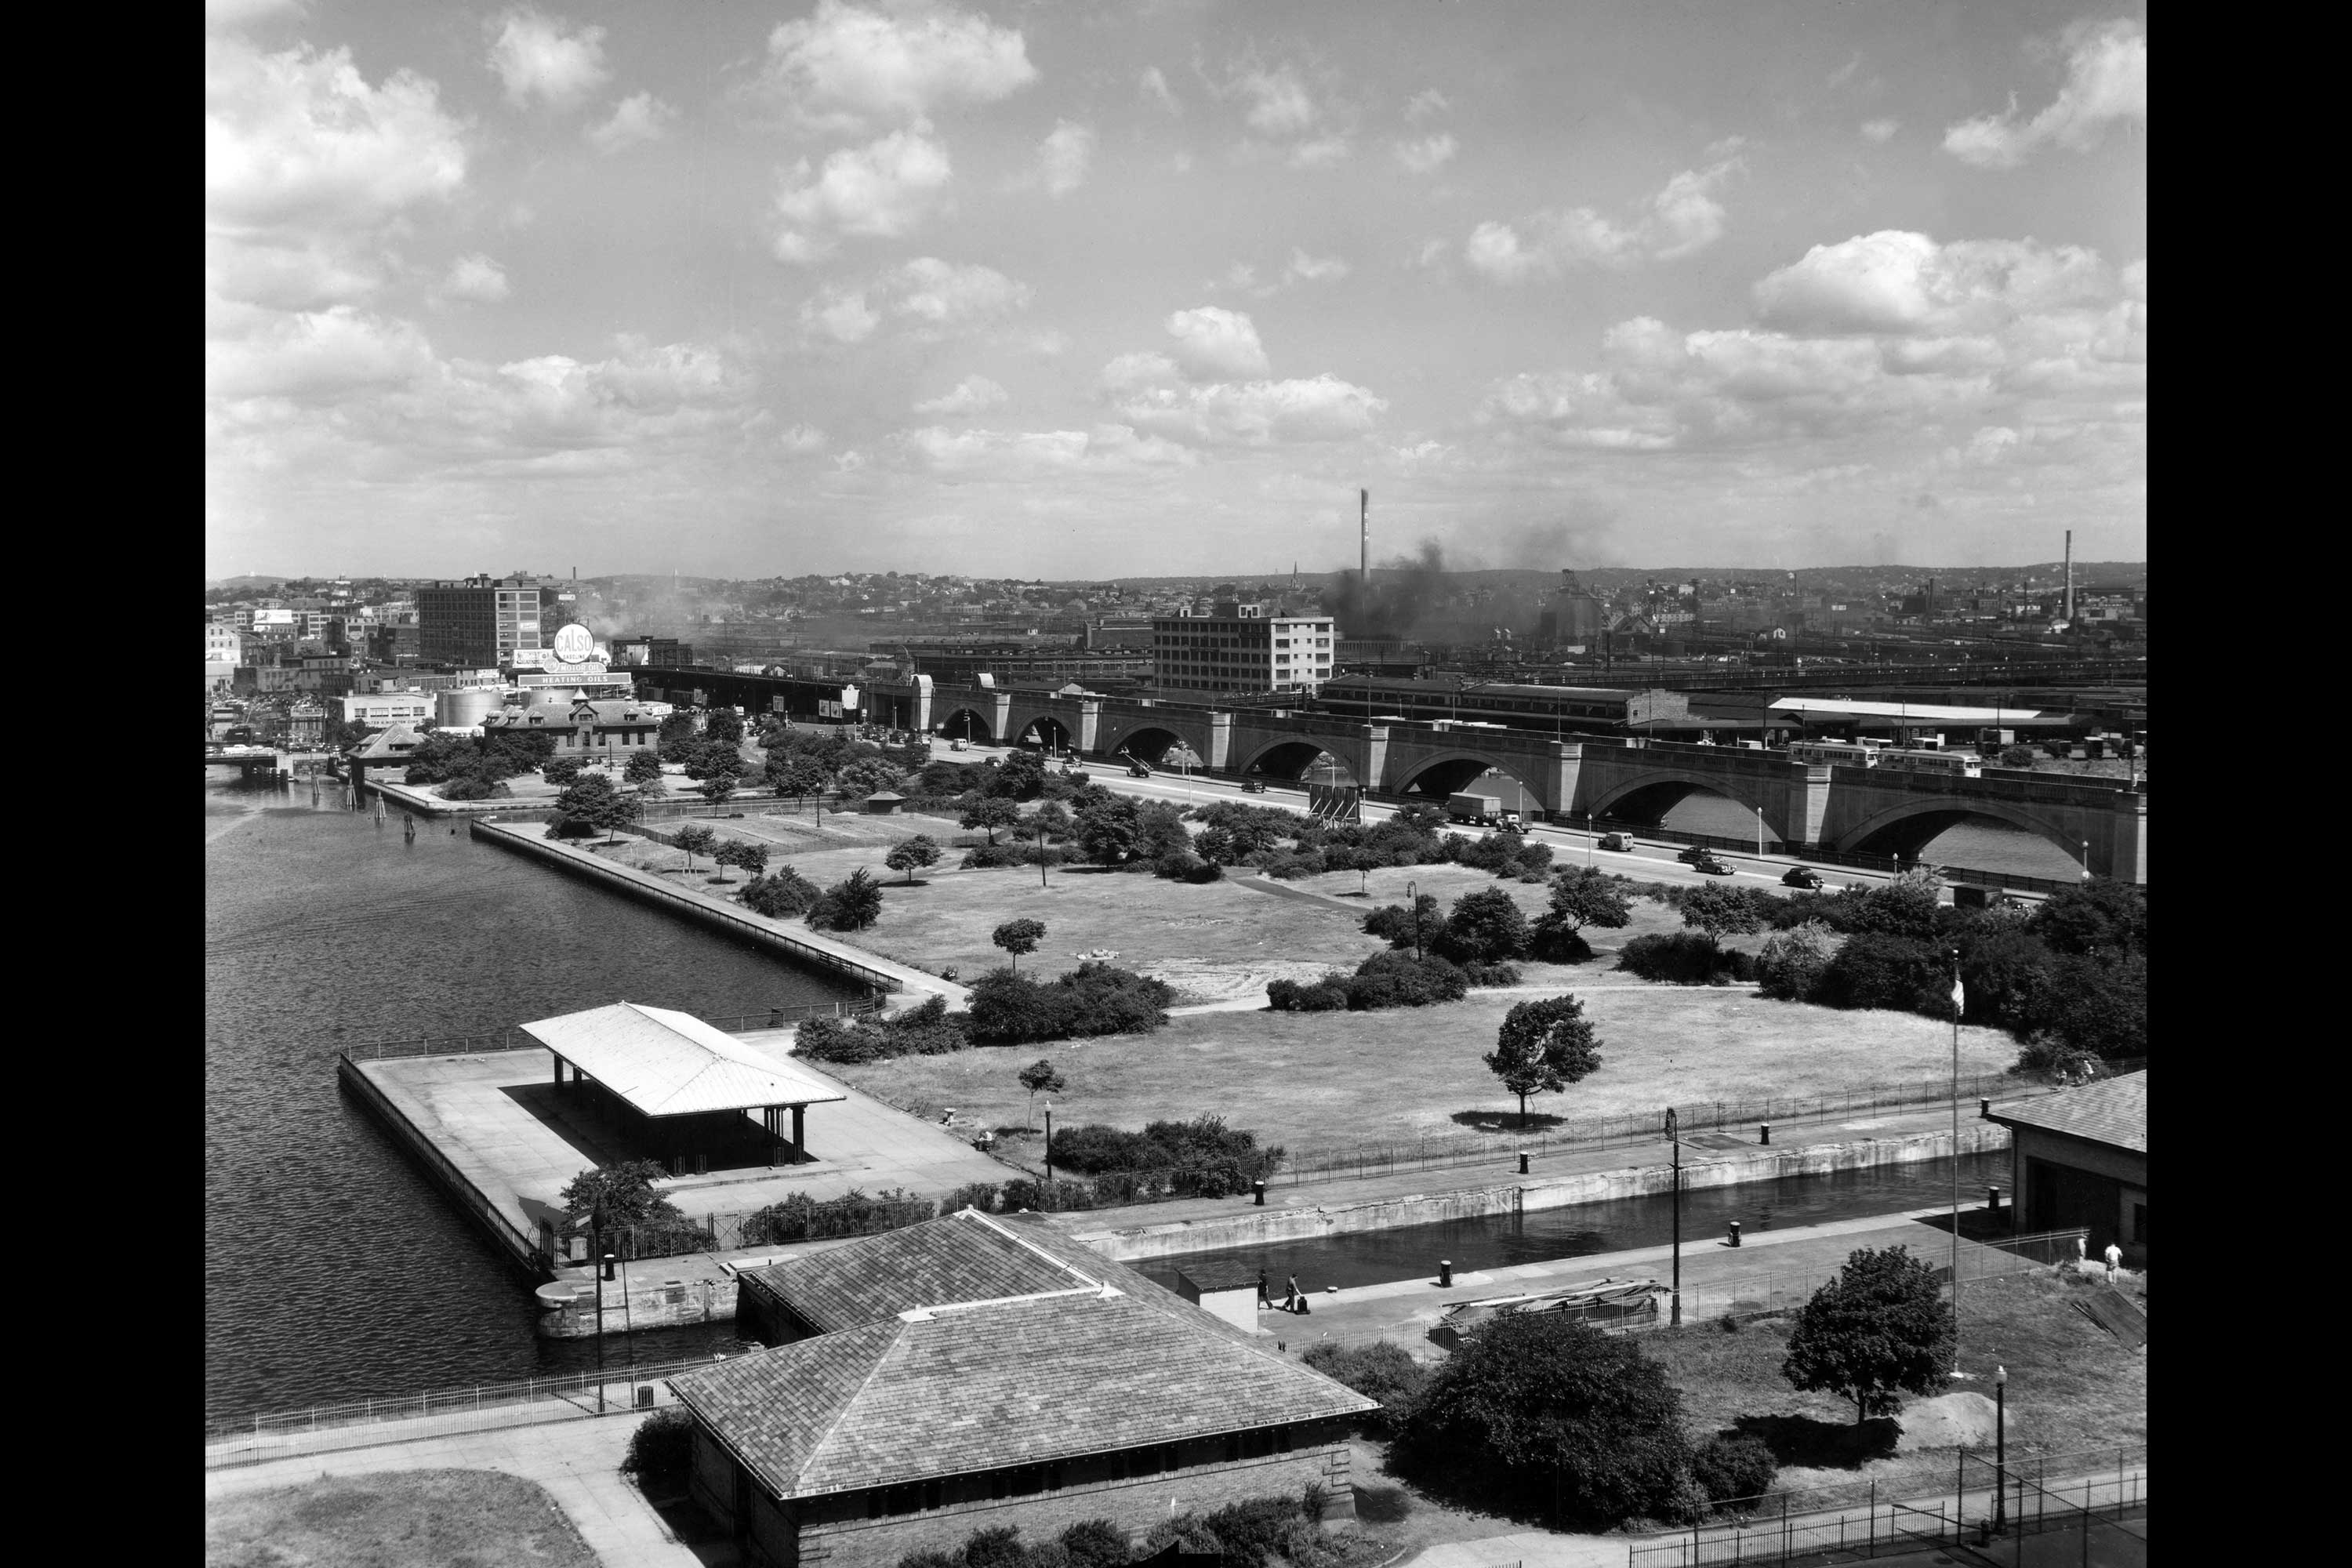 Science Park 1946. This is a photograph of Science Park in 1946 before the Museum of Science was built.